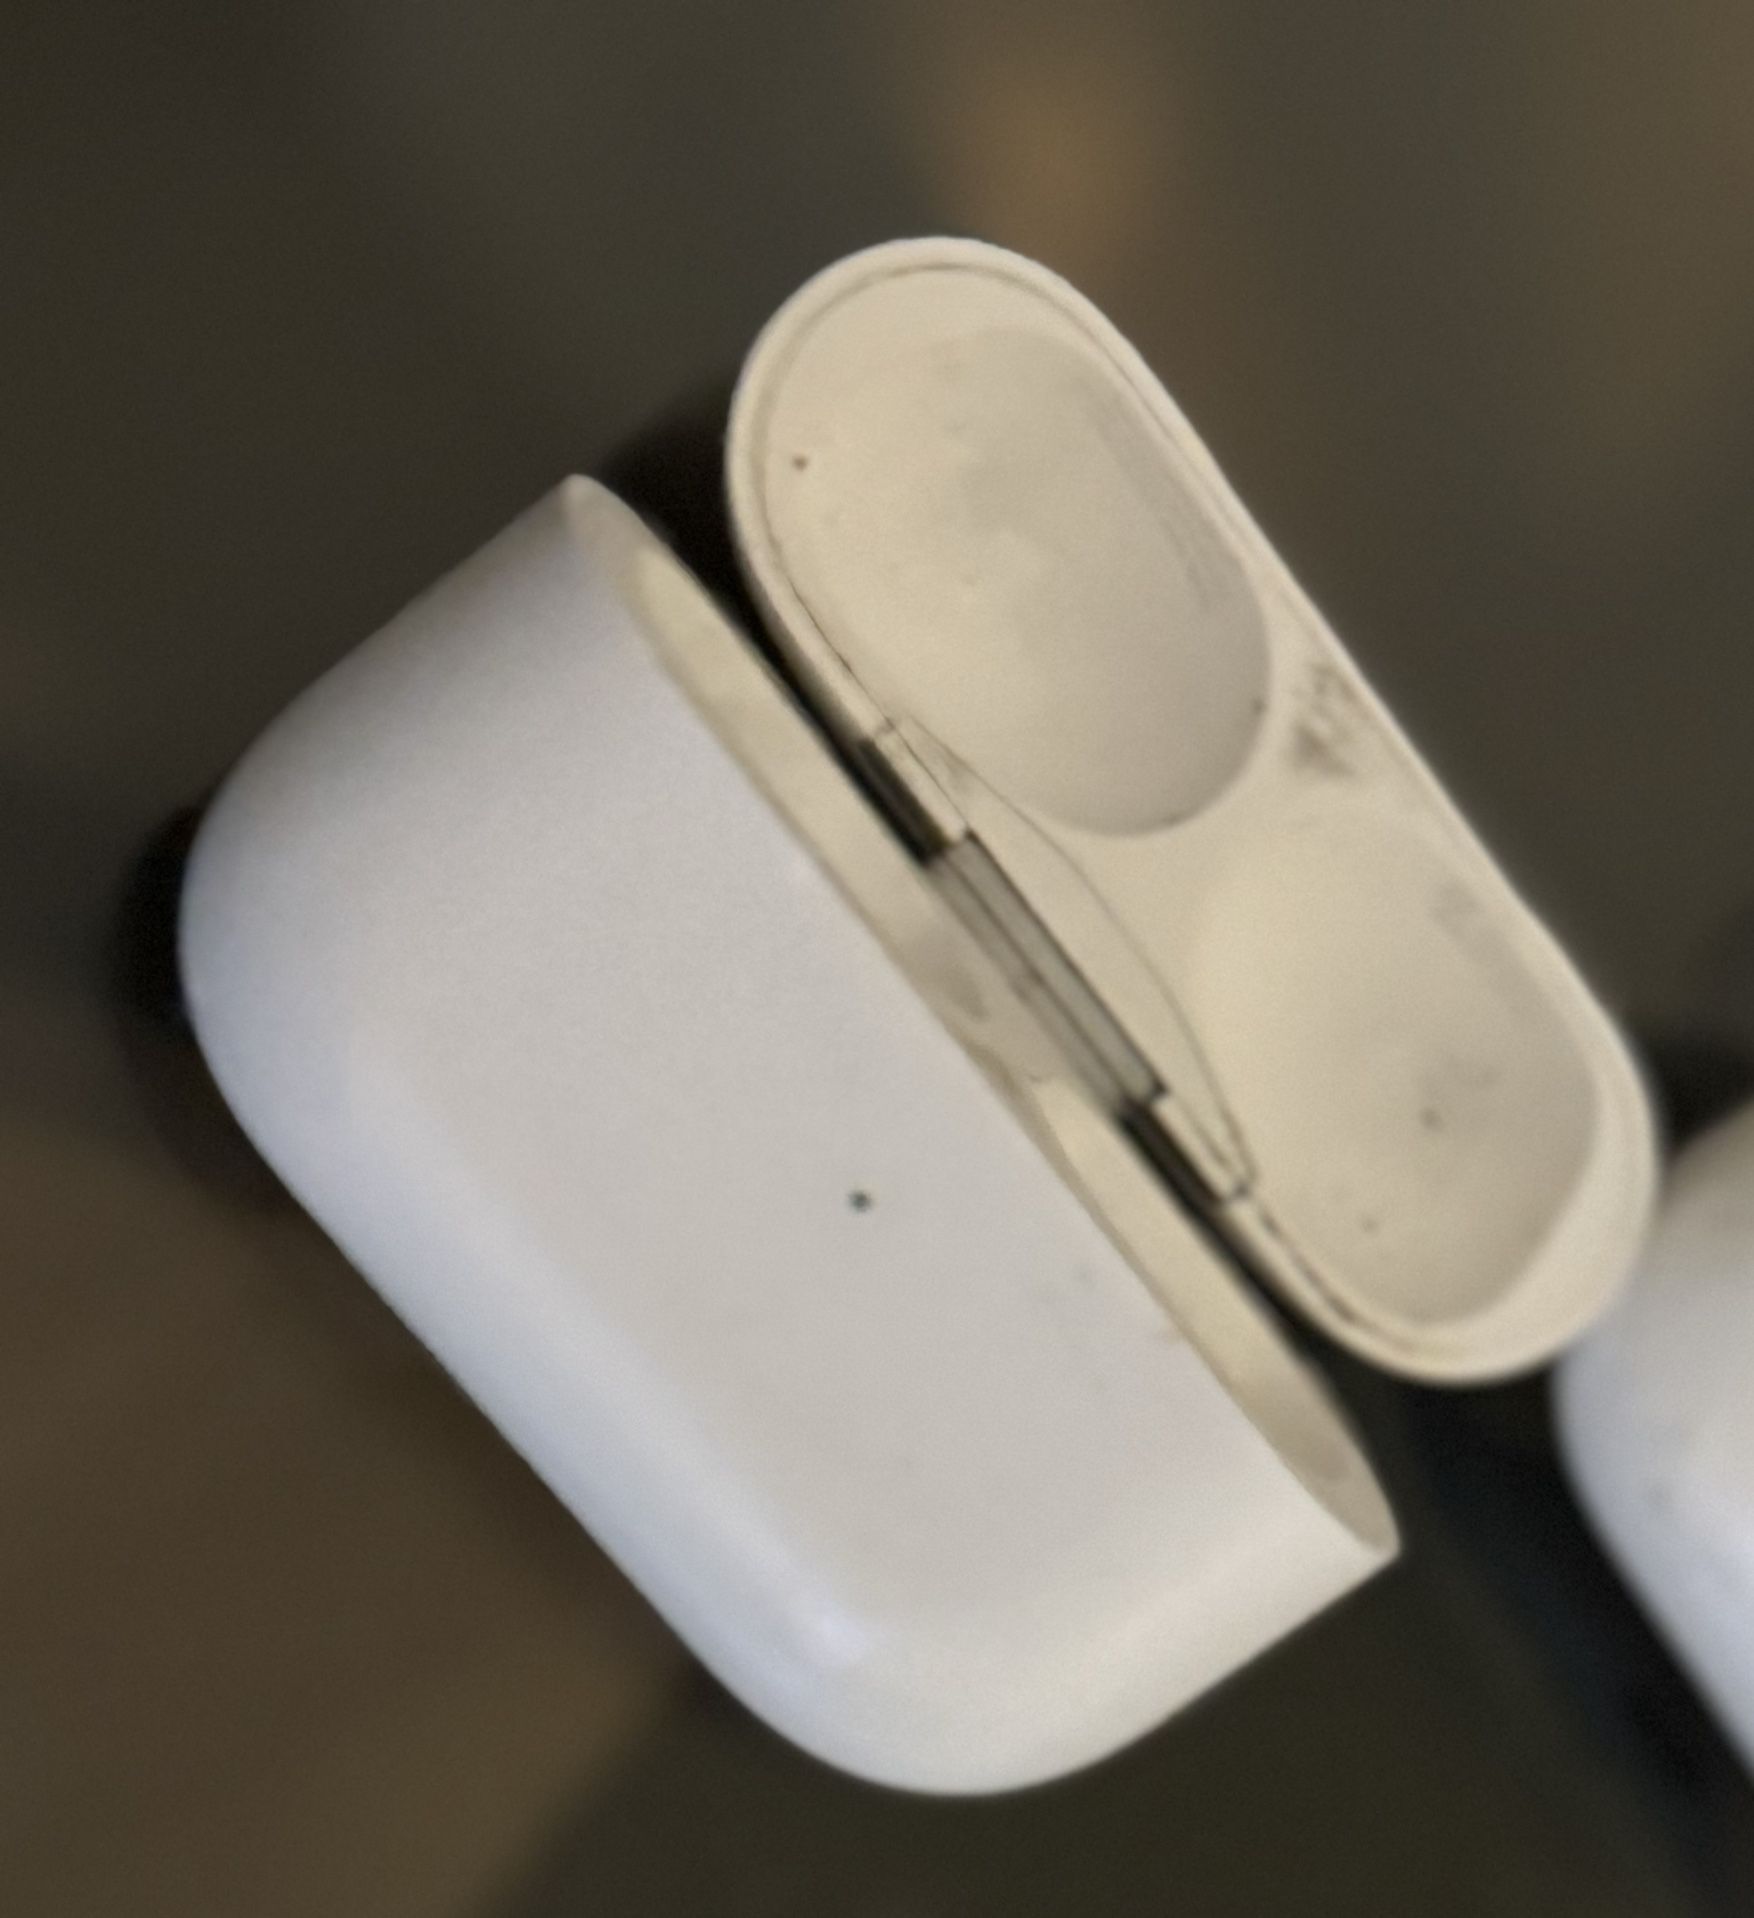 AirPods Charging case 